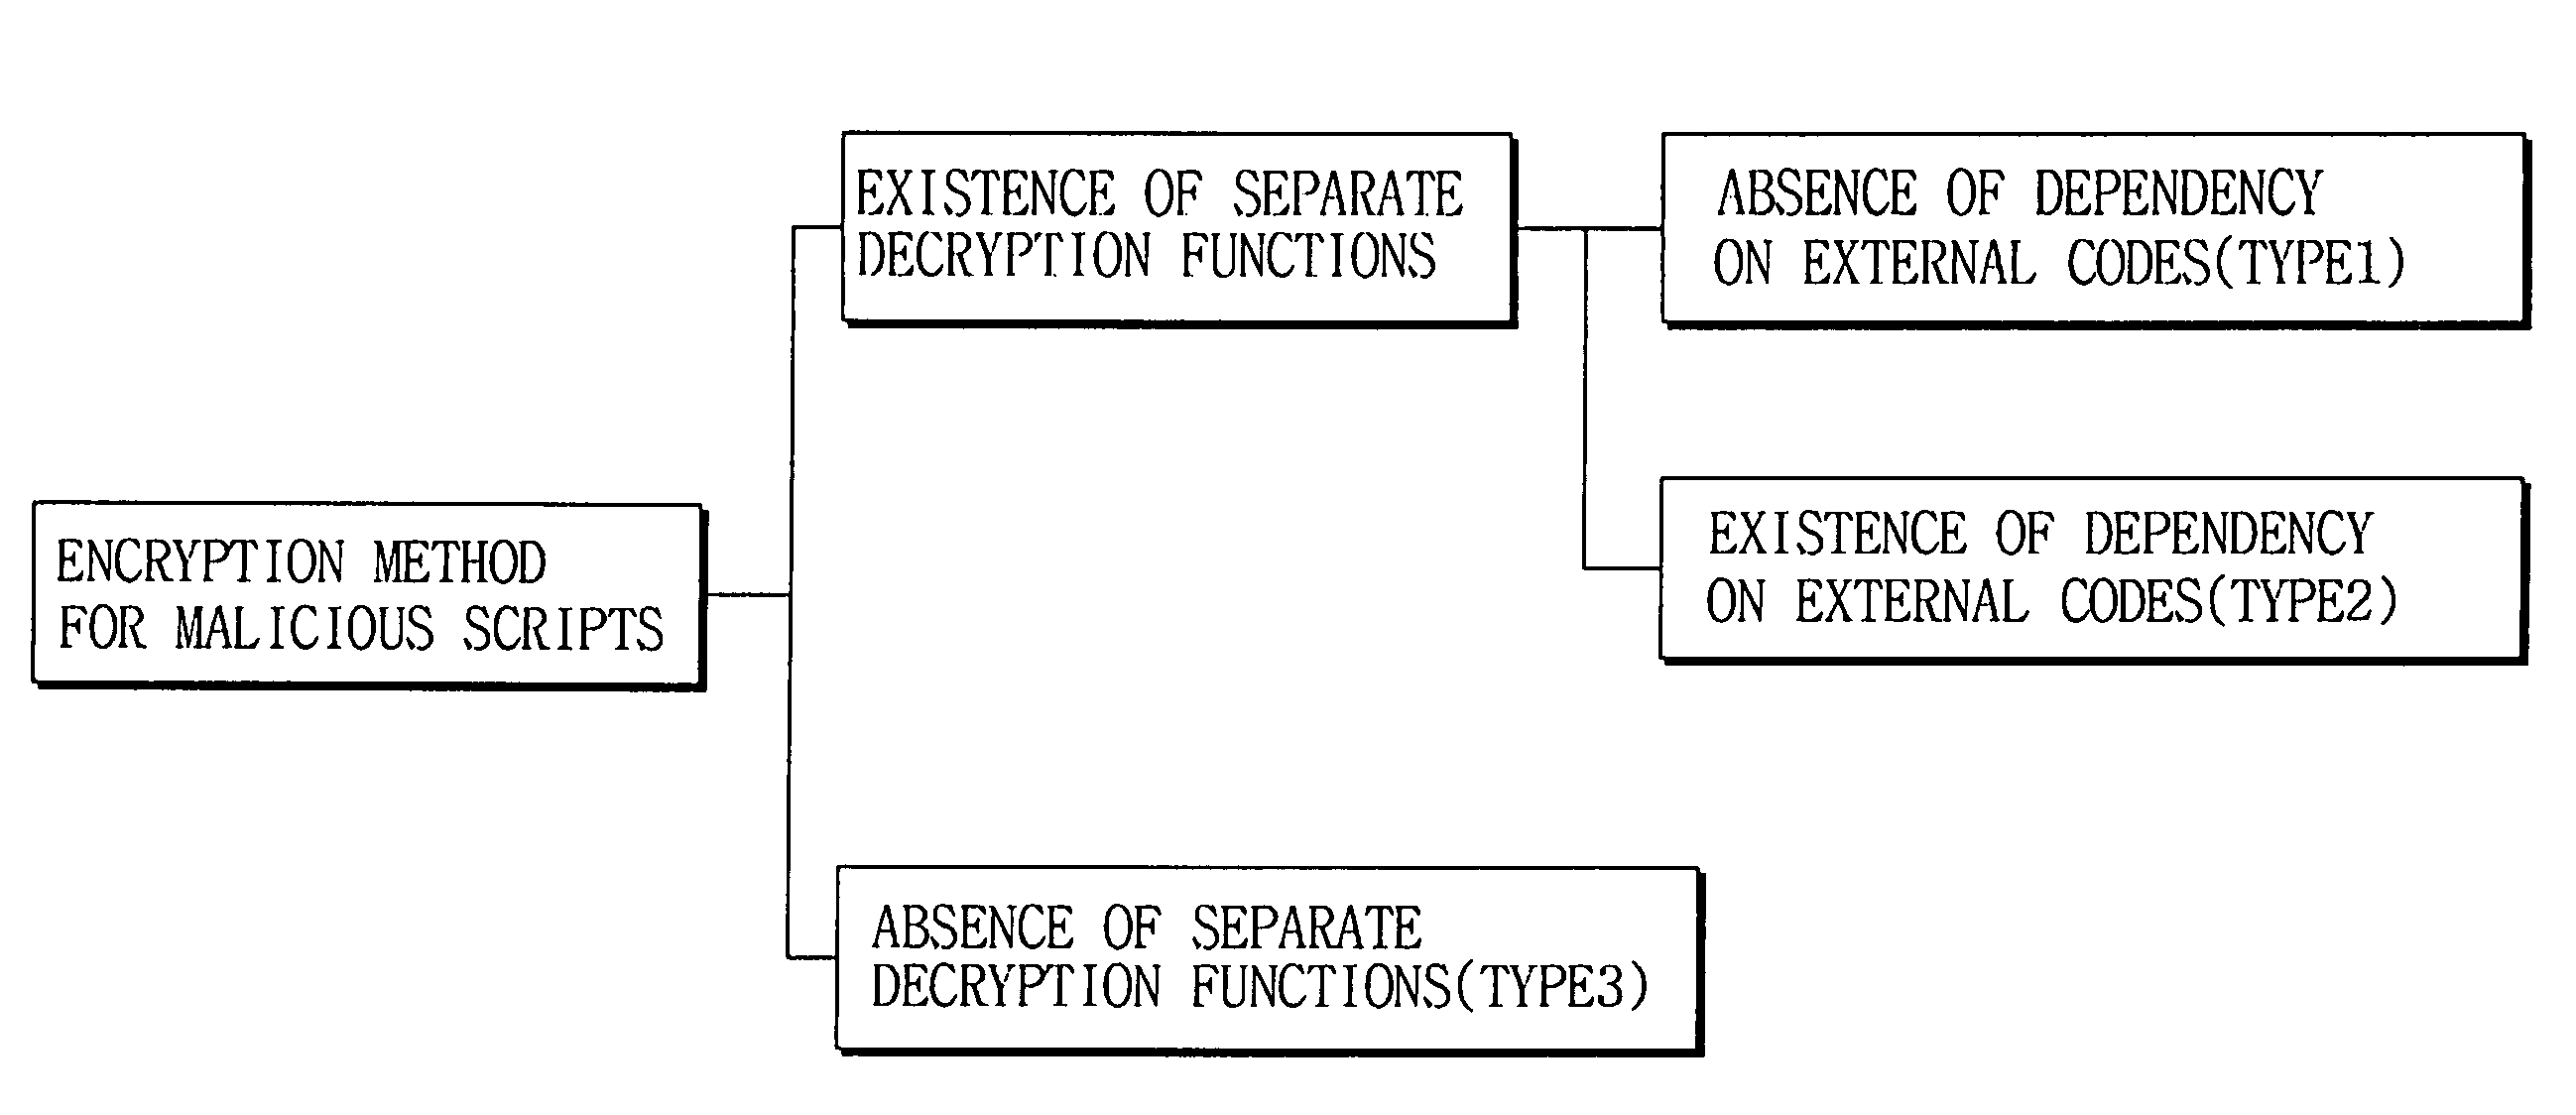 Method of decrypting and analyzing encrypted malicious scripts